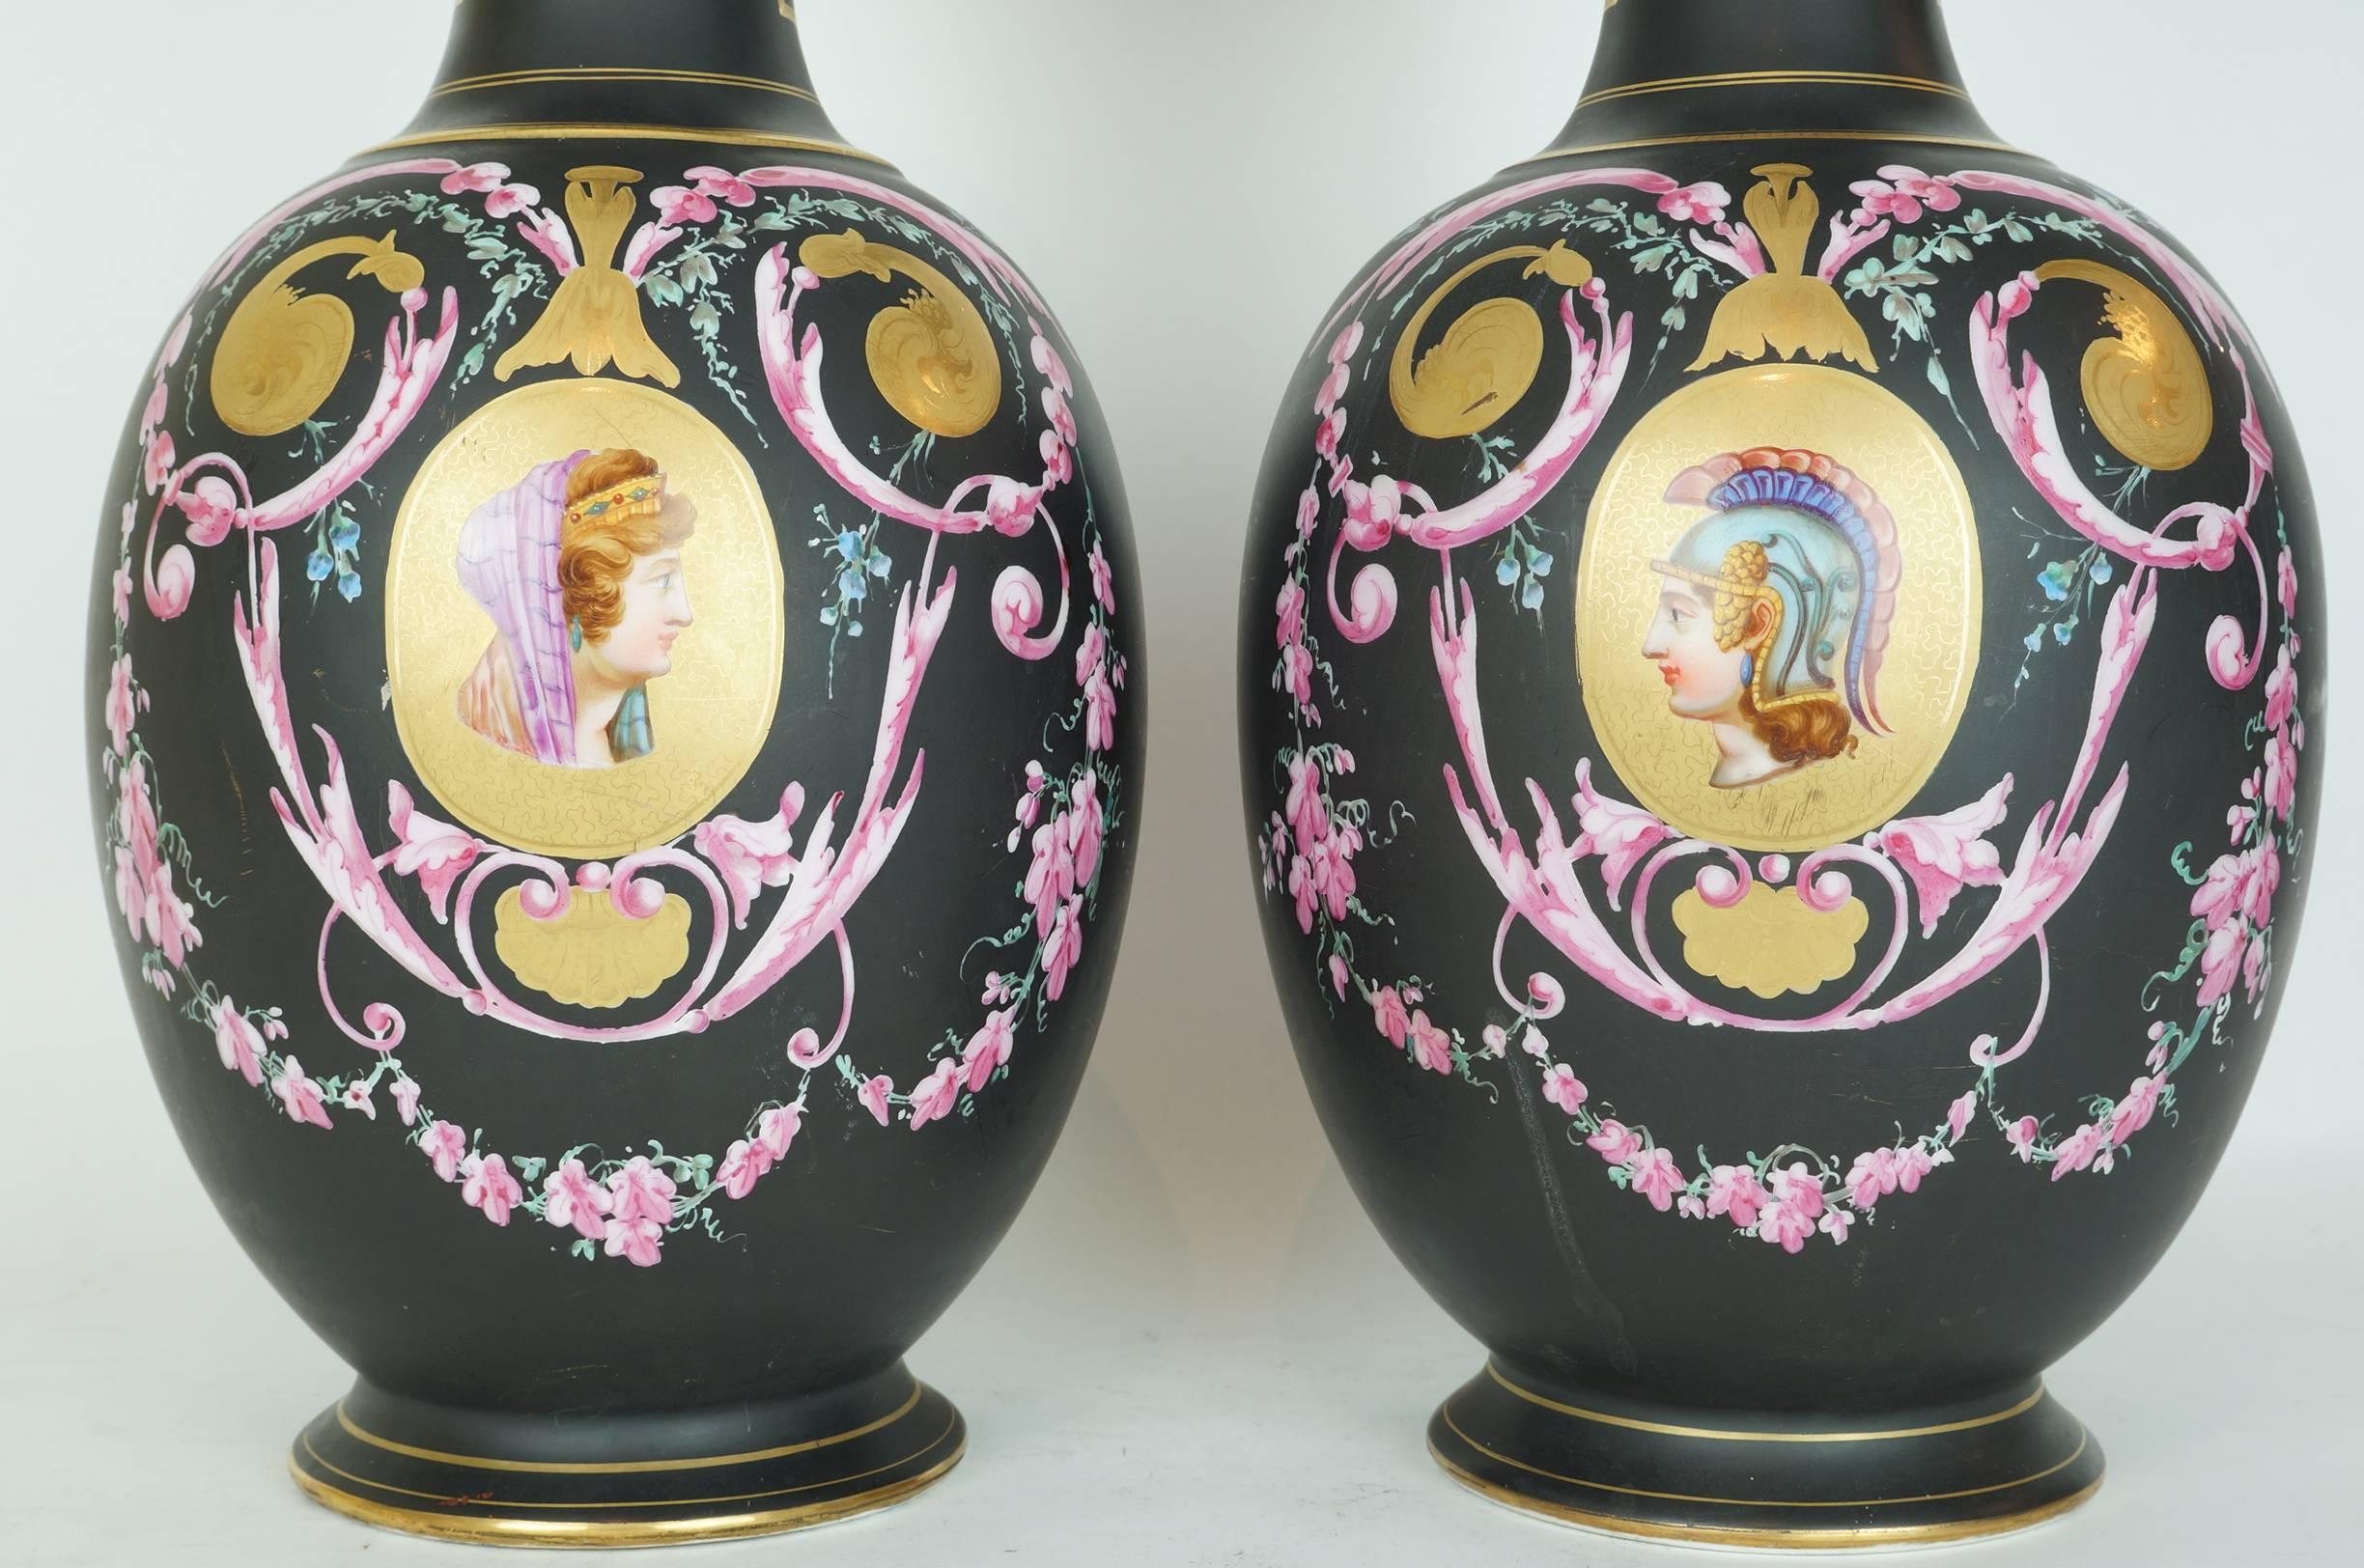 Pair of Neoclassical Porcelain Vases with Painted Portrait and Floral Decoration
Previously made into lamps with hole on bottom of base
Stock Number: DA132